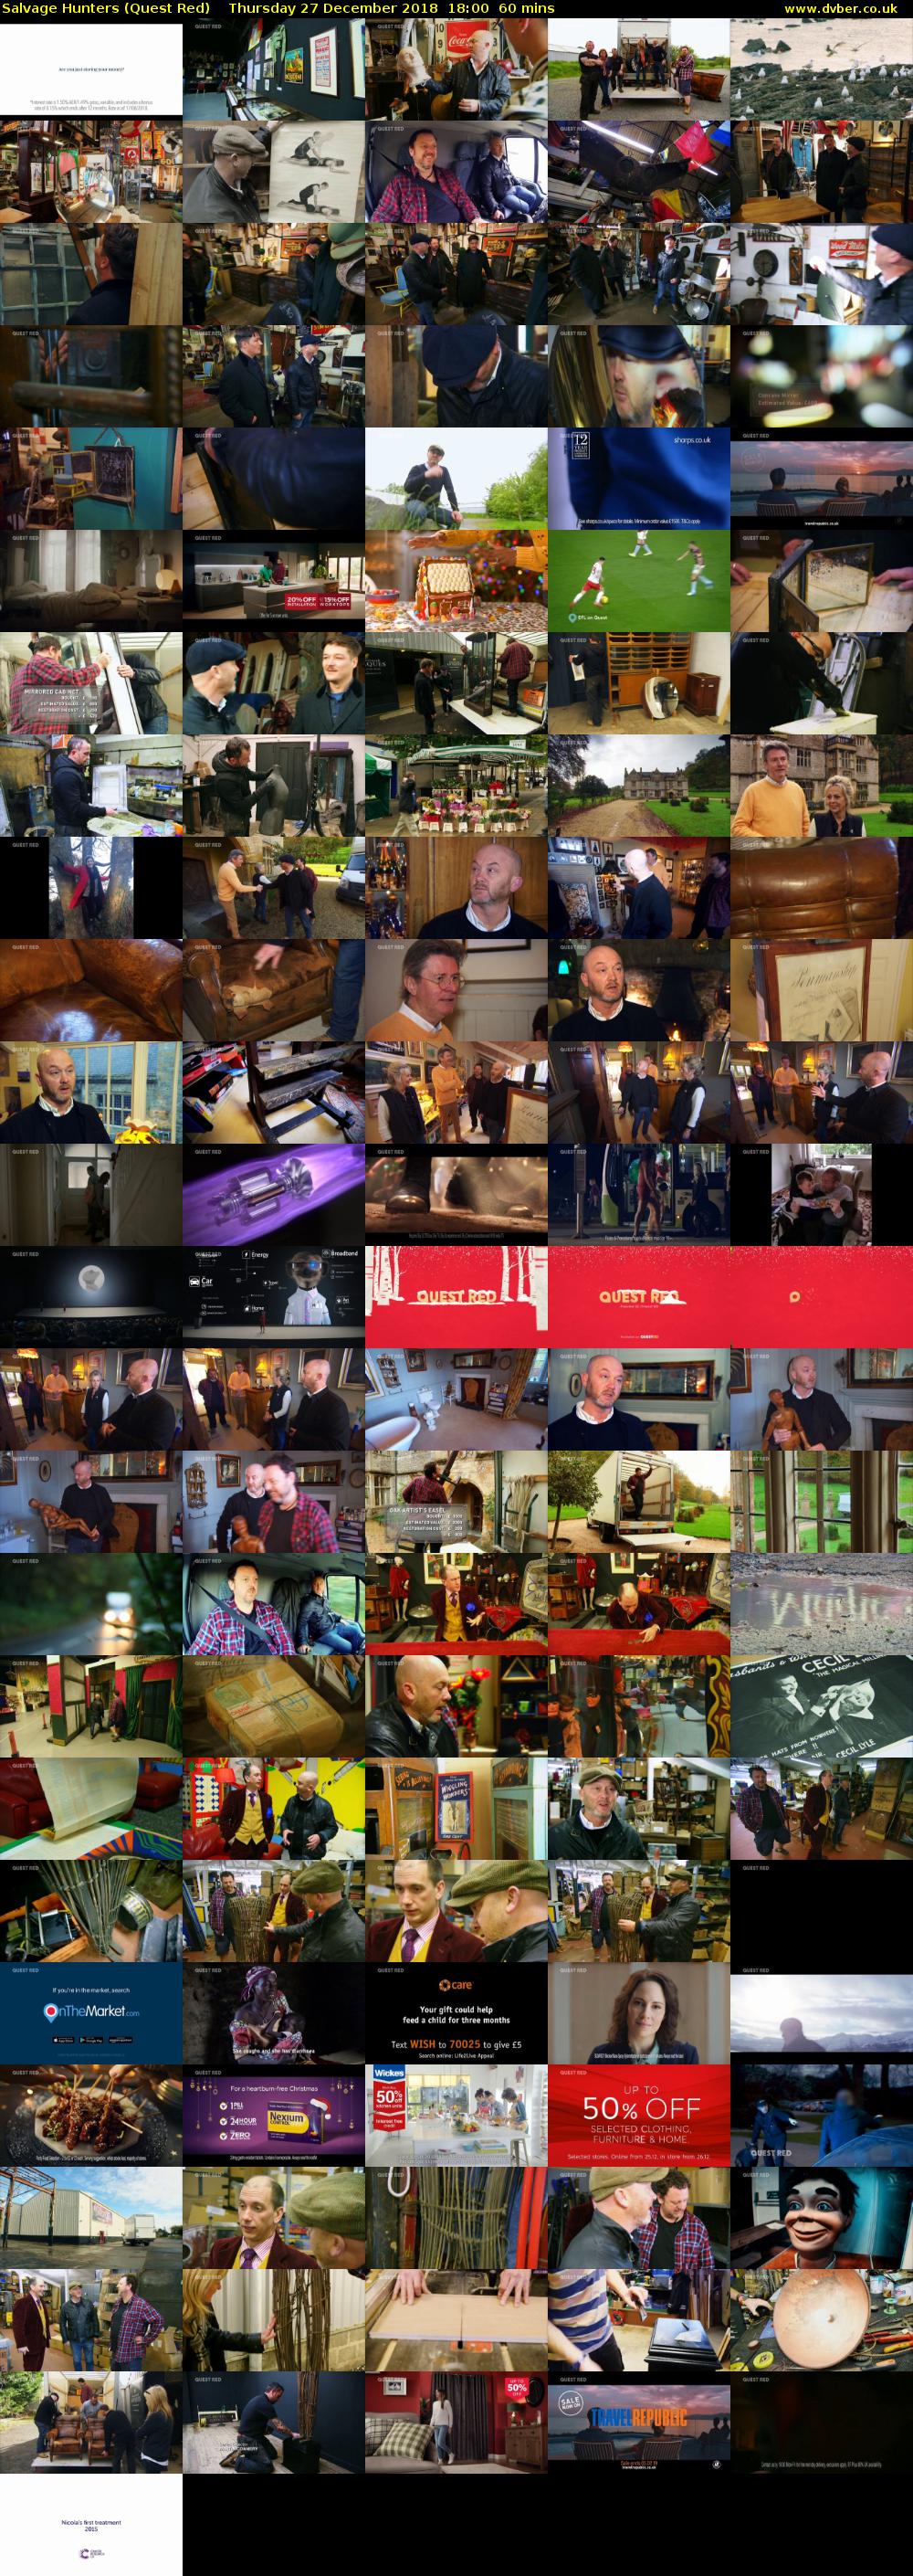 Salvage Hunters (Quest Red) Thursday 27 December 2018 18:00 - 19:00